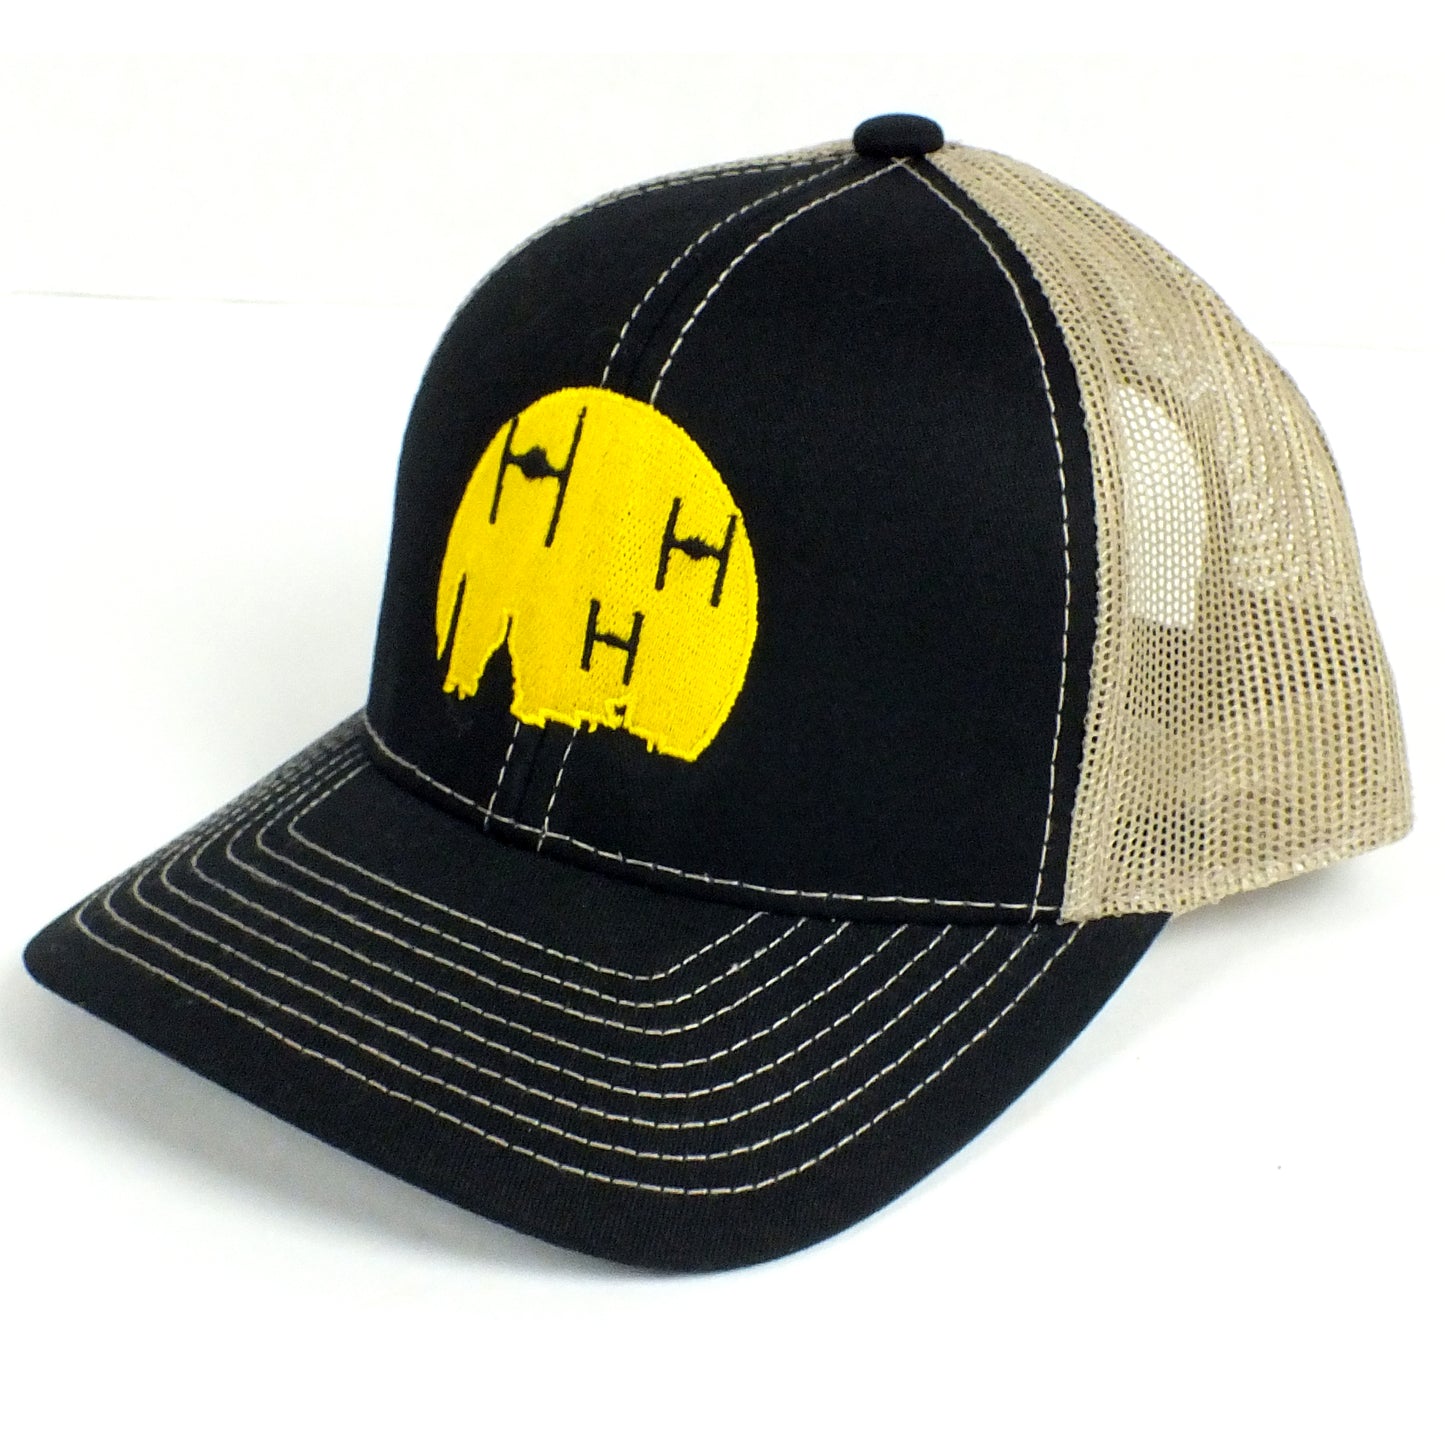 The Empire Strikes the District Trucker Hat Snapback